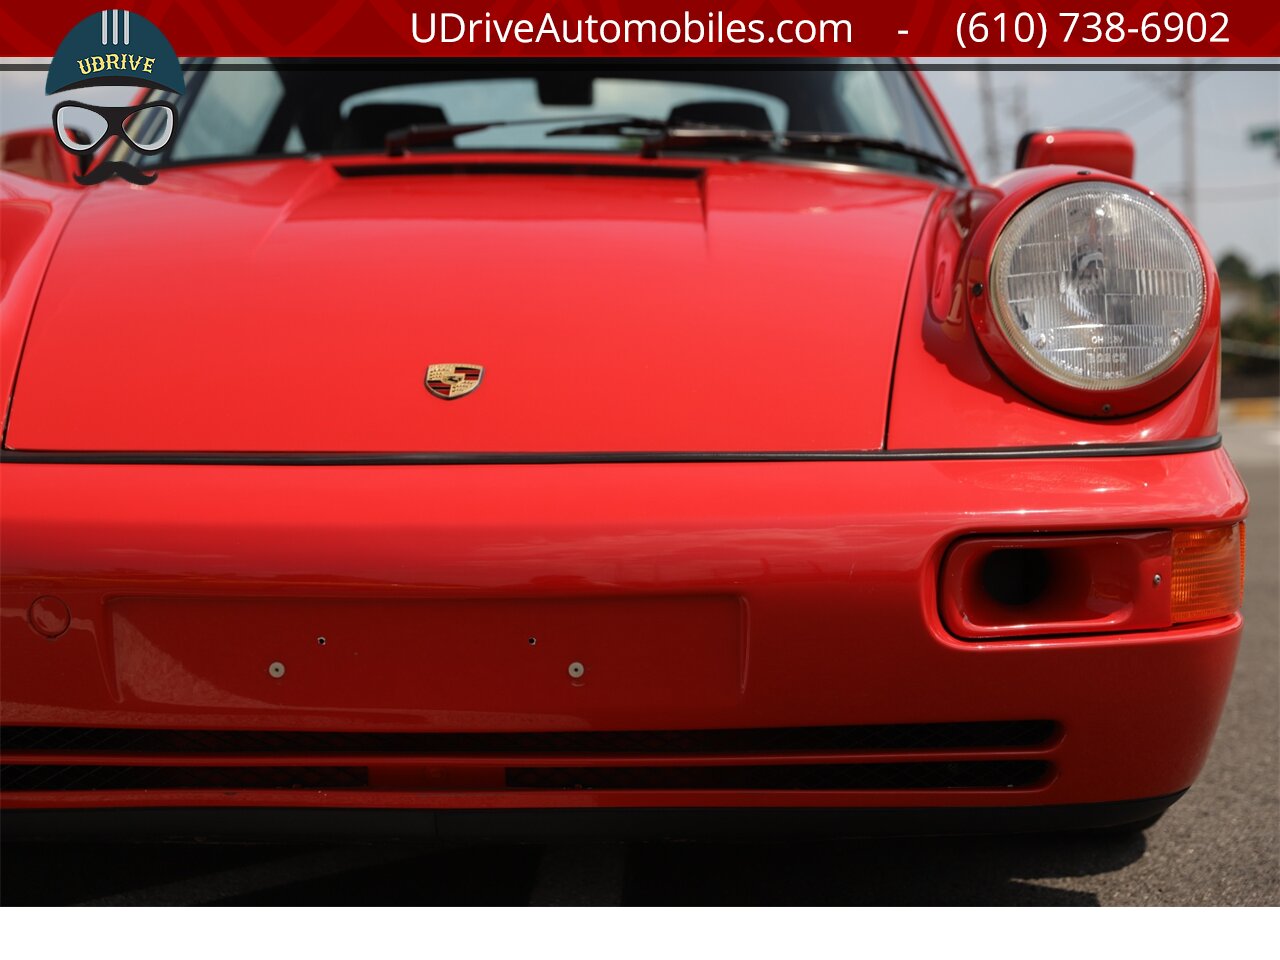 1989 Porsche 911 Carrera 4 964 C4 5 Speed Engine Rebuild  $40k in Service History Cup 1 Wheels - Photo 10 - West Chester, PA 19382